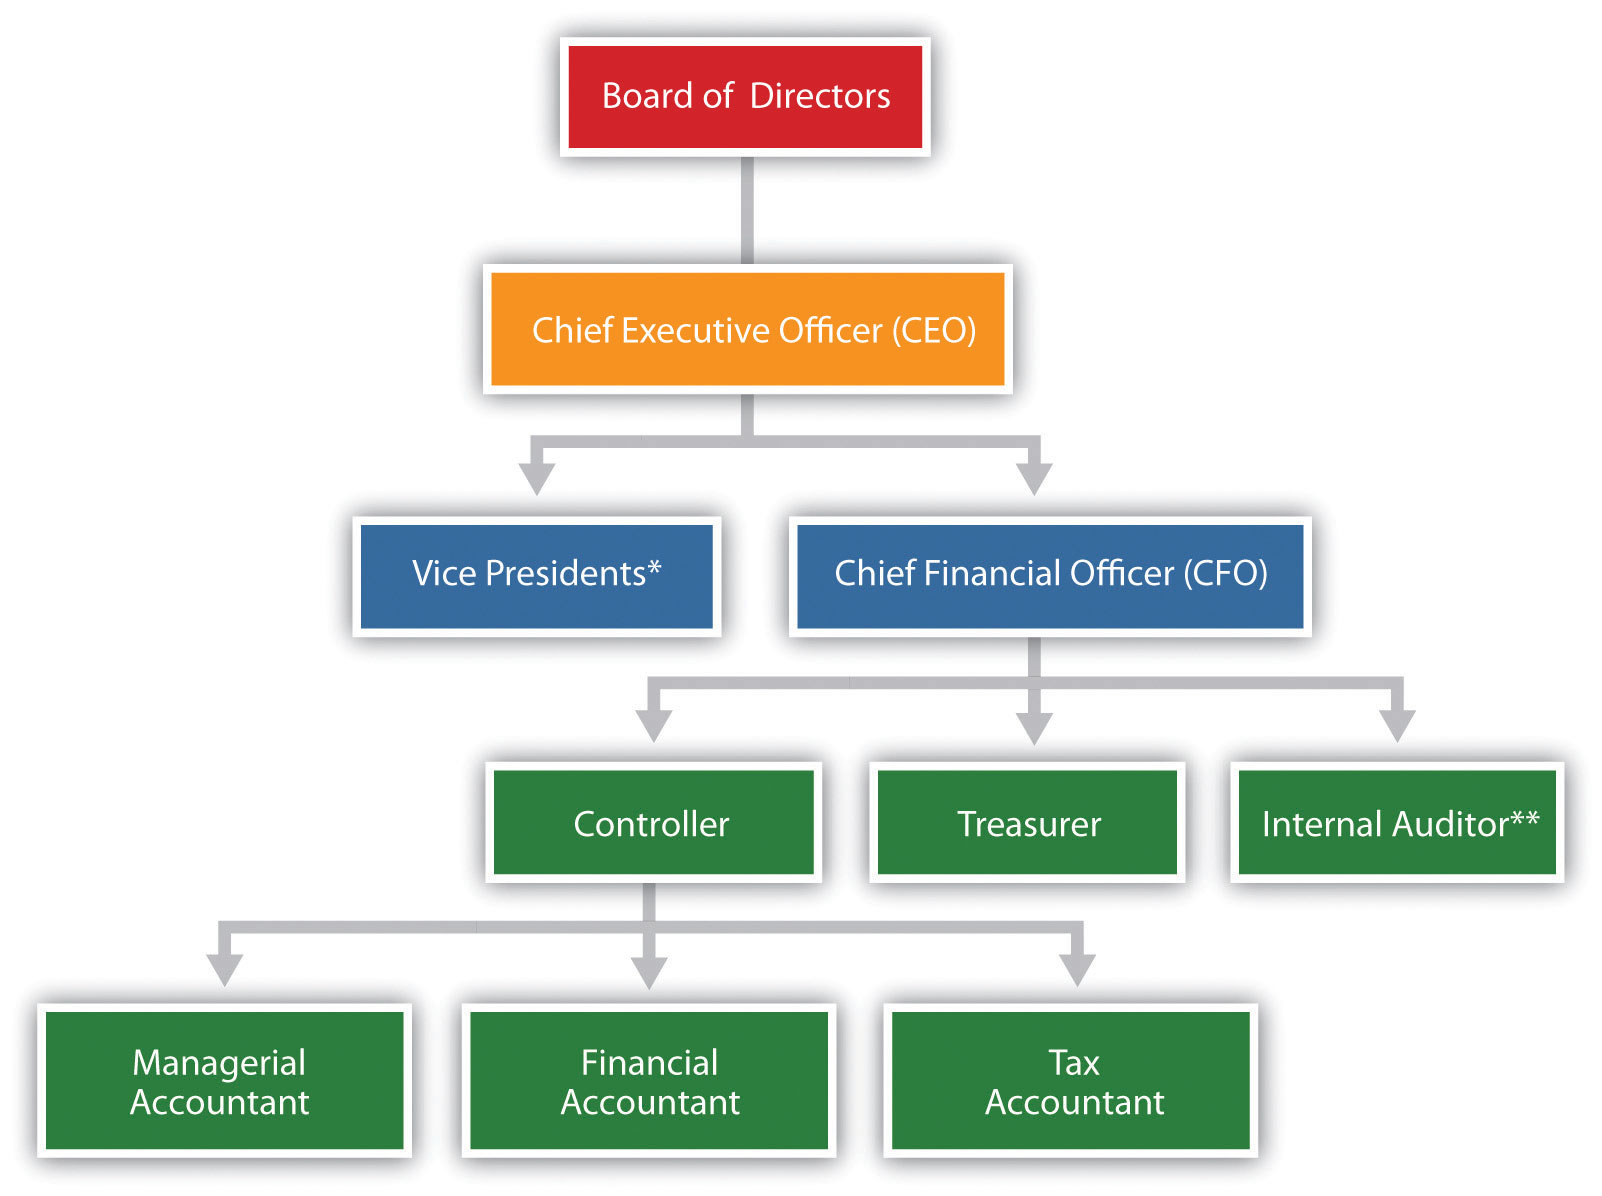 Accounting department organizational chart for small business